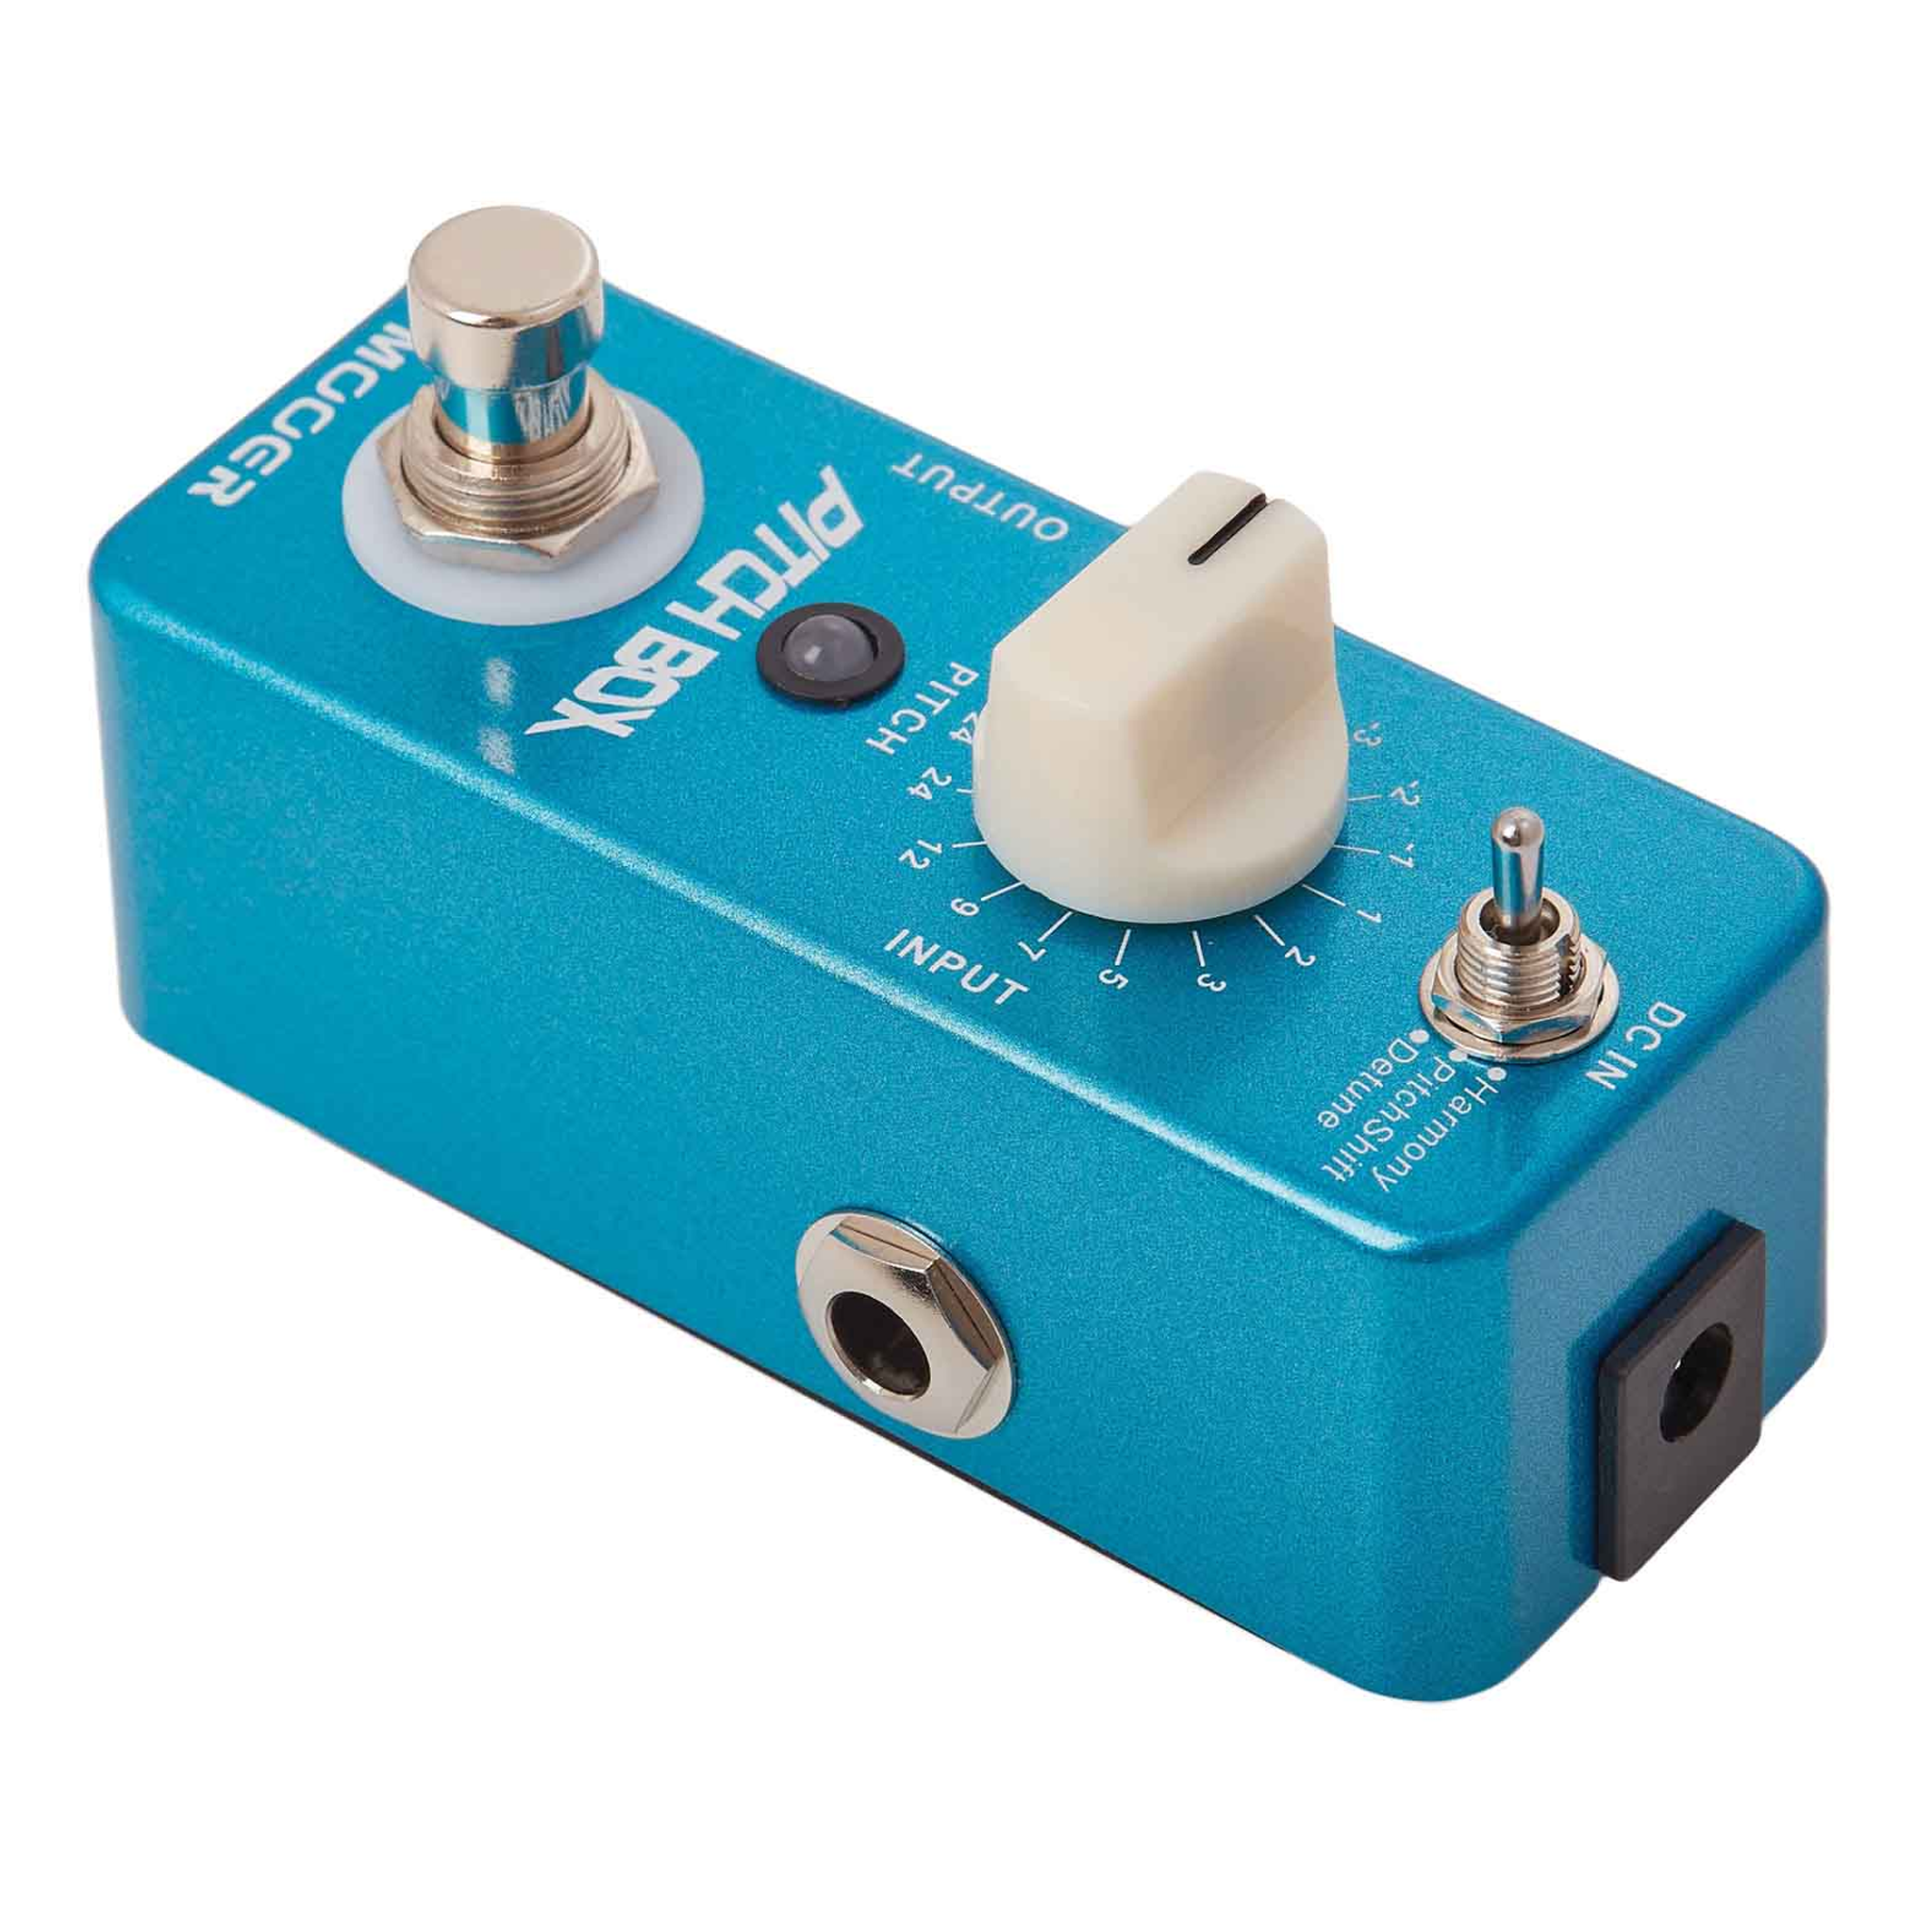 Mooer Pitch Box Pitch Shifter Guitar Effects Pedal